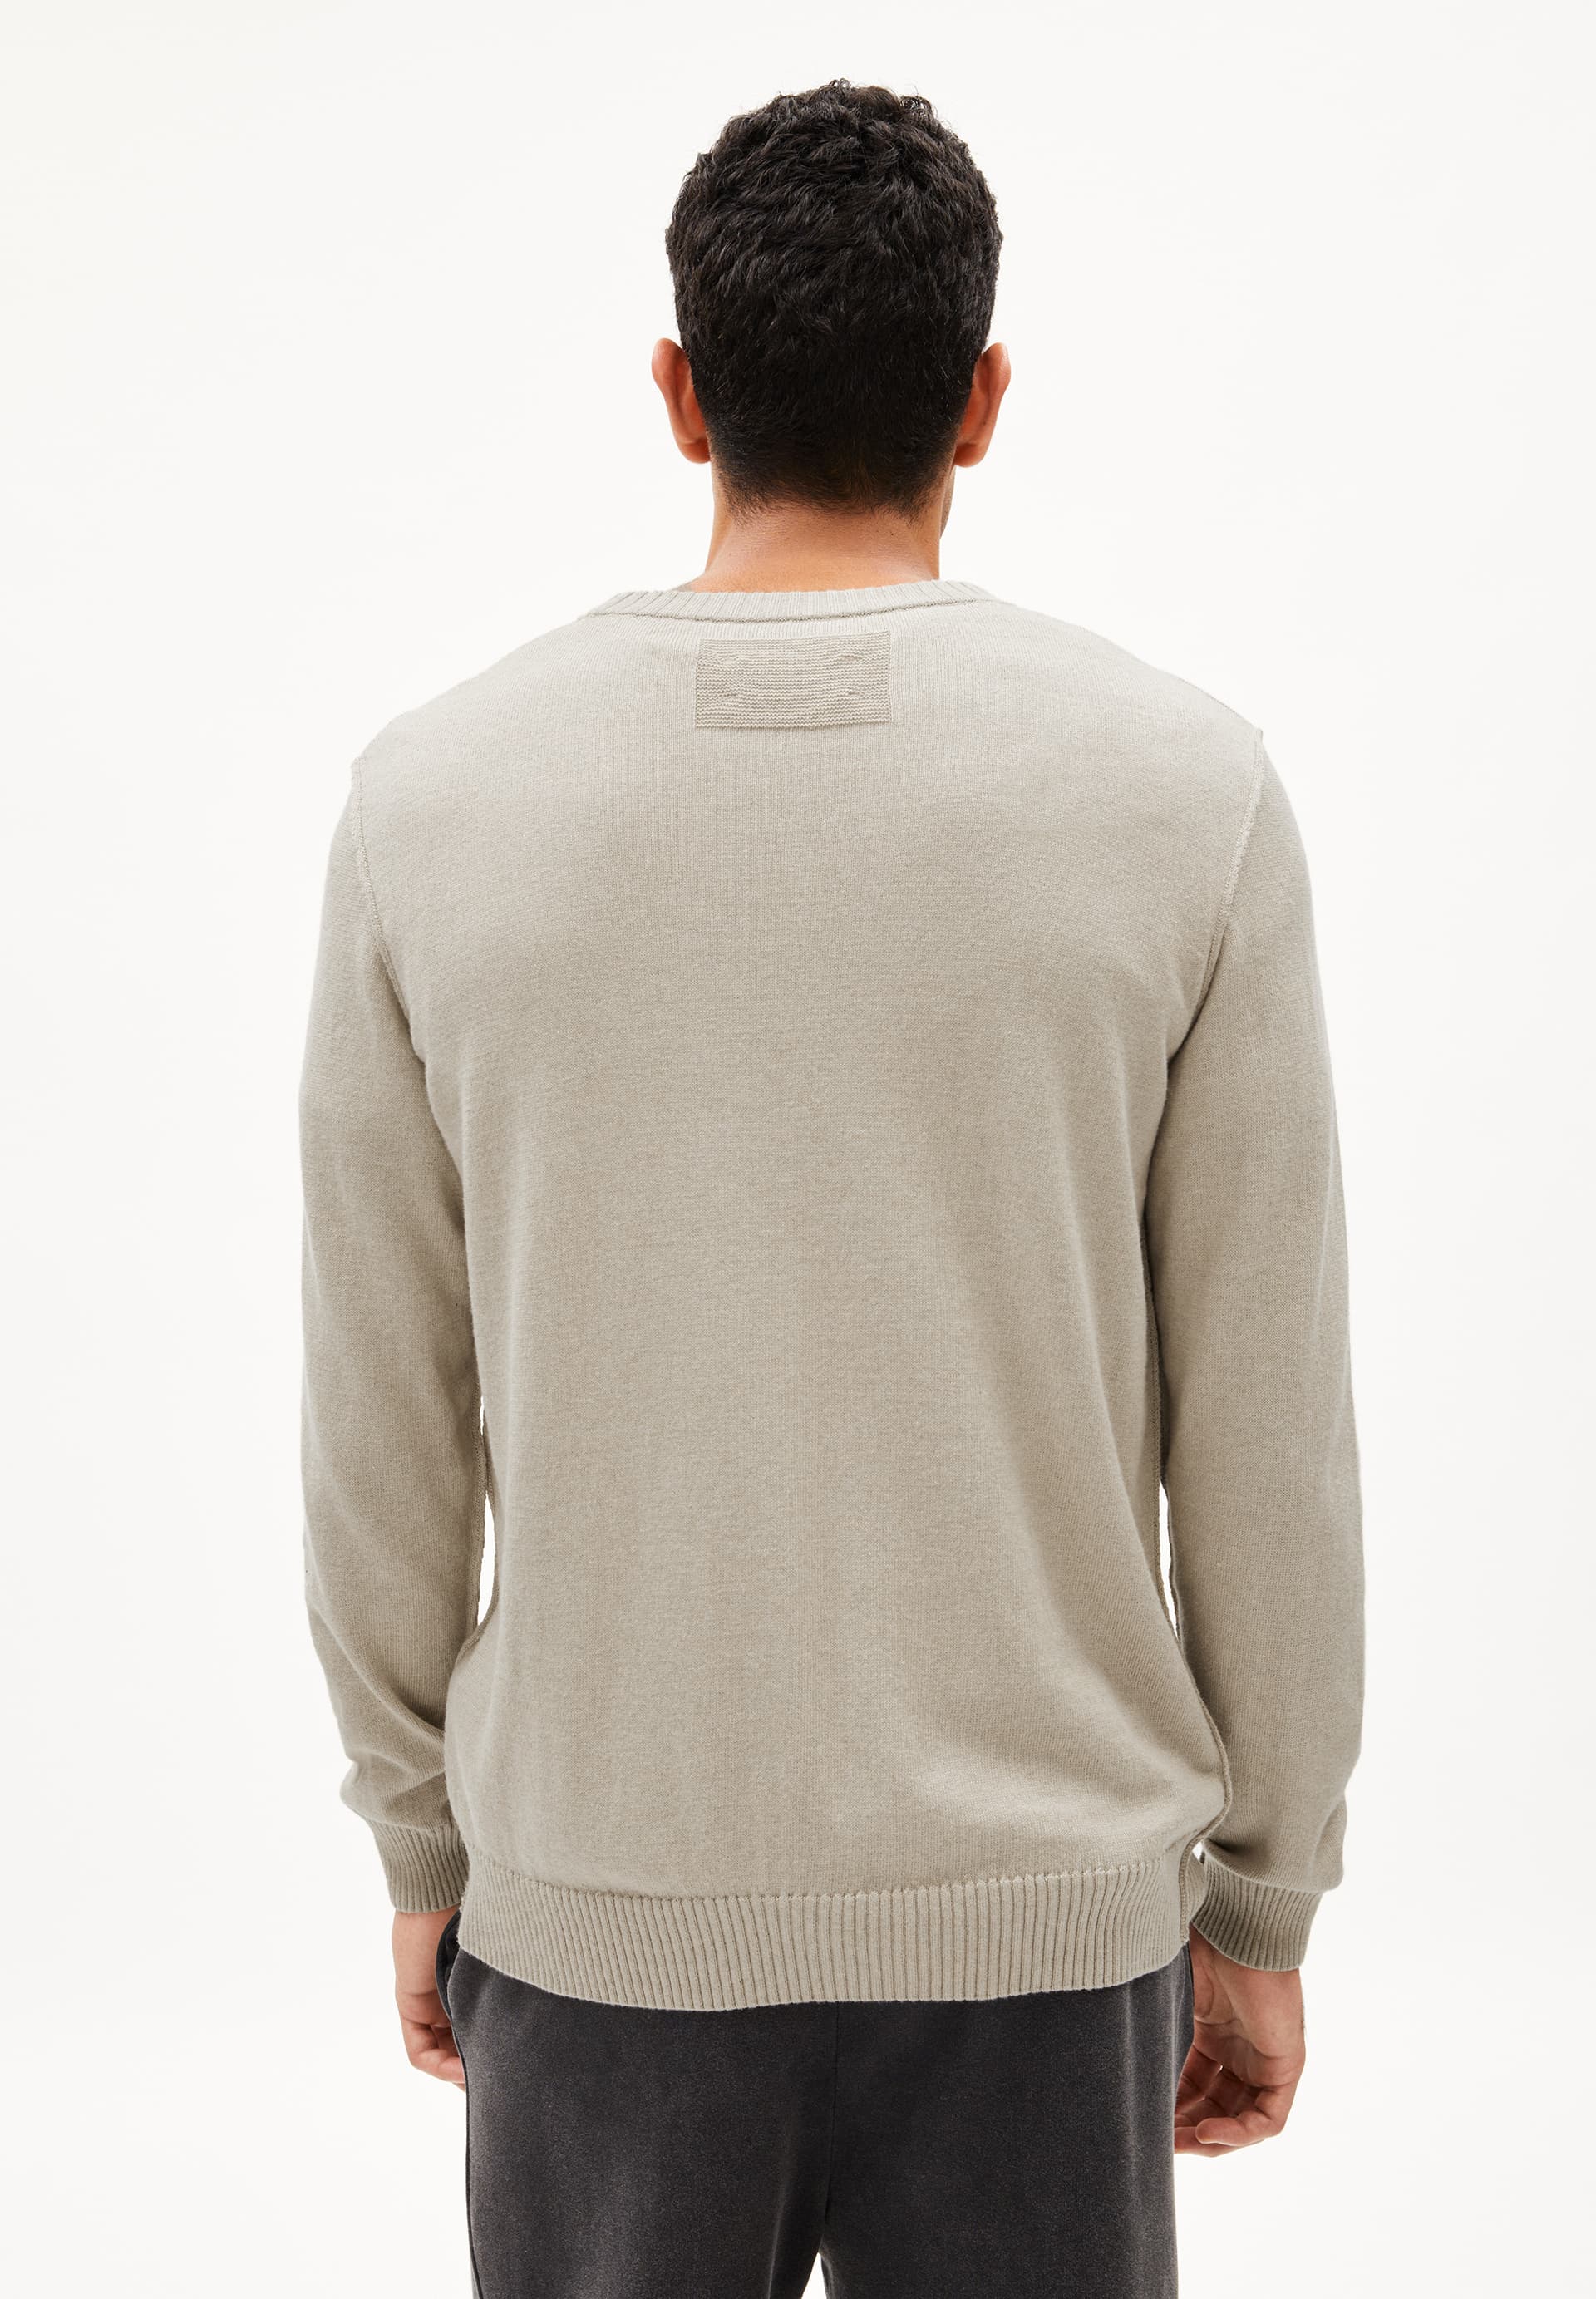 HORAACIOS Sweater Regular Fit made of Organic Wool Mix